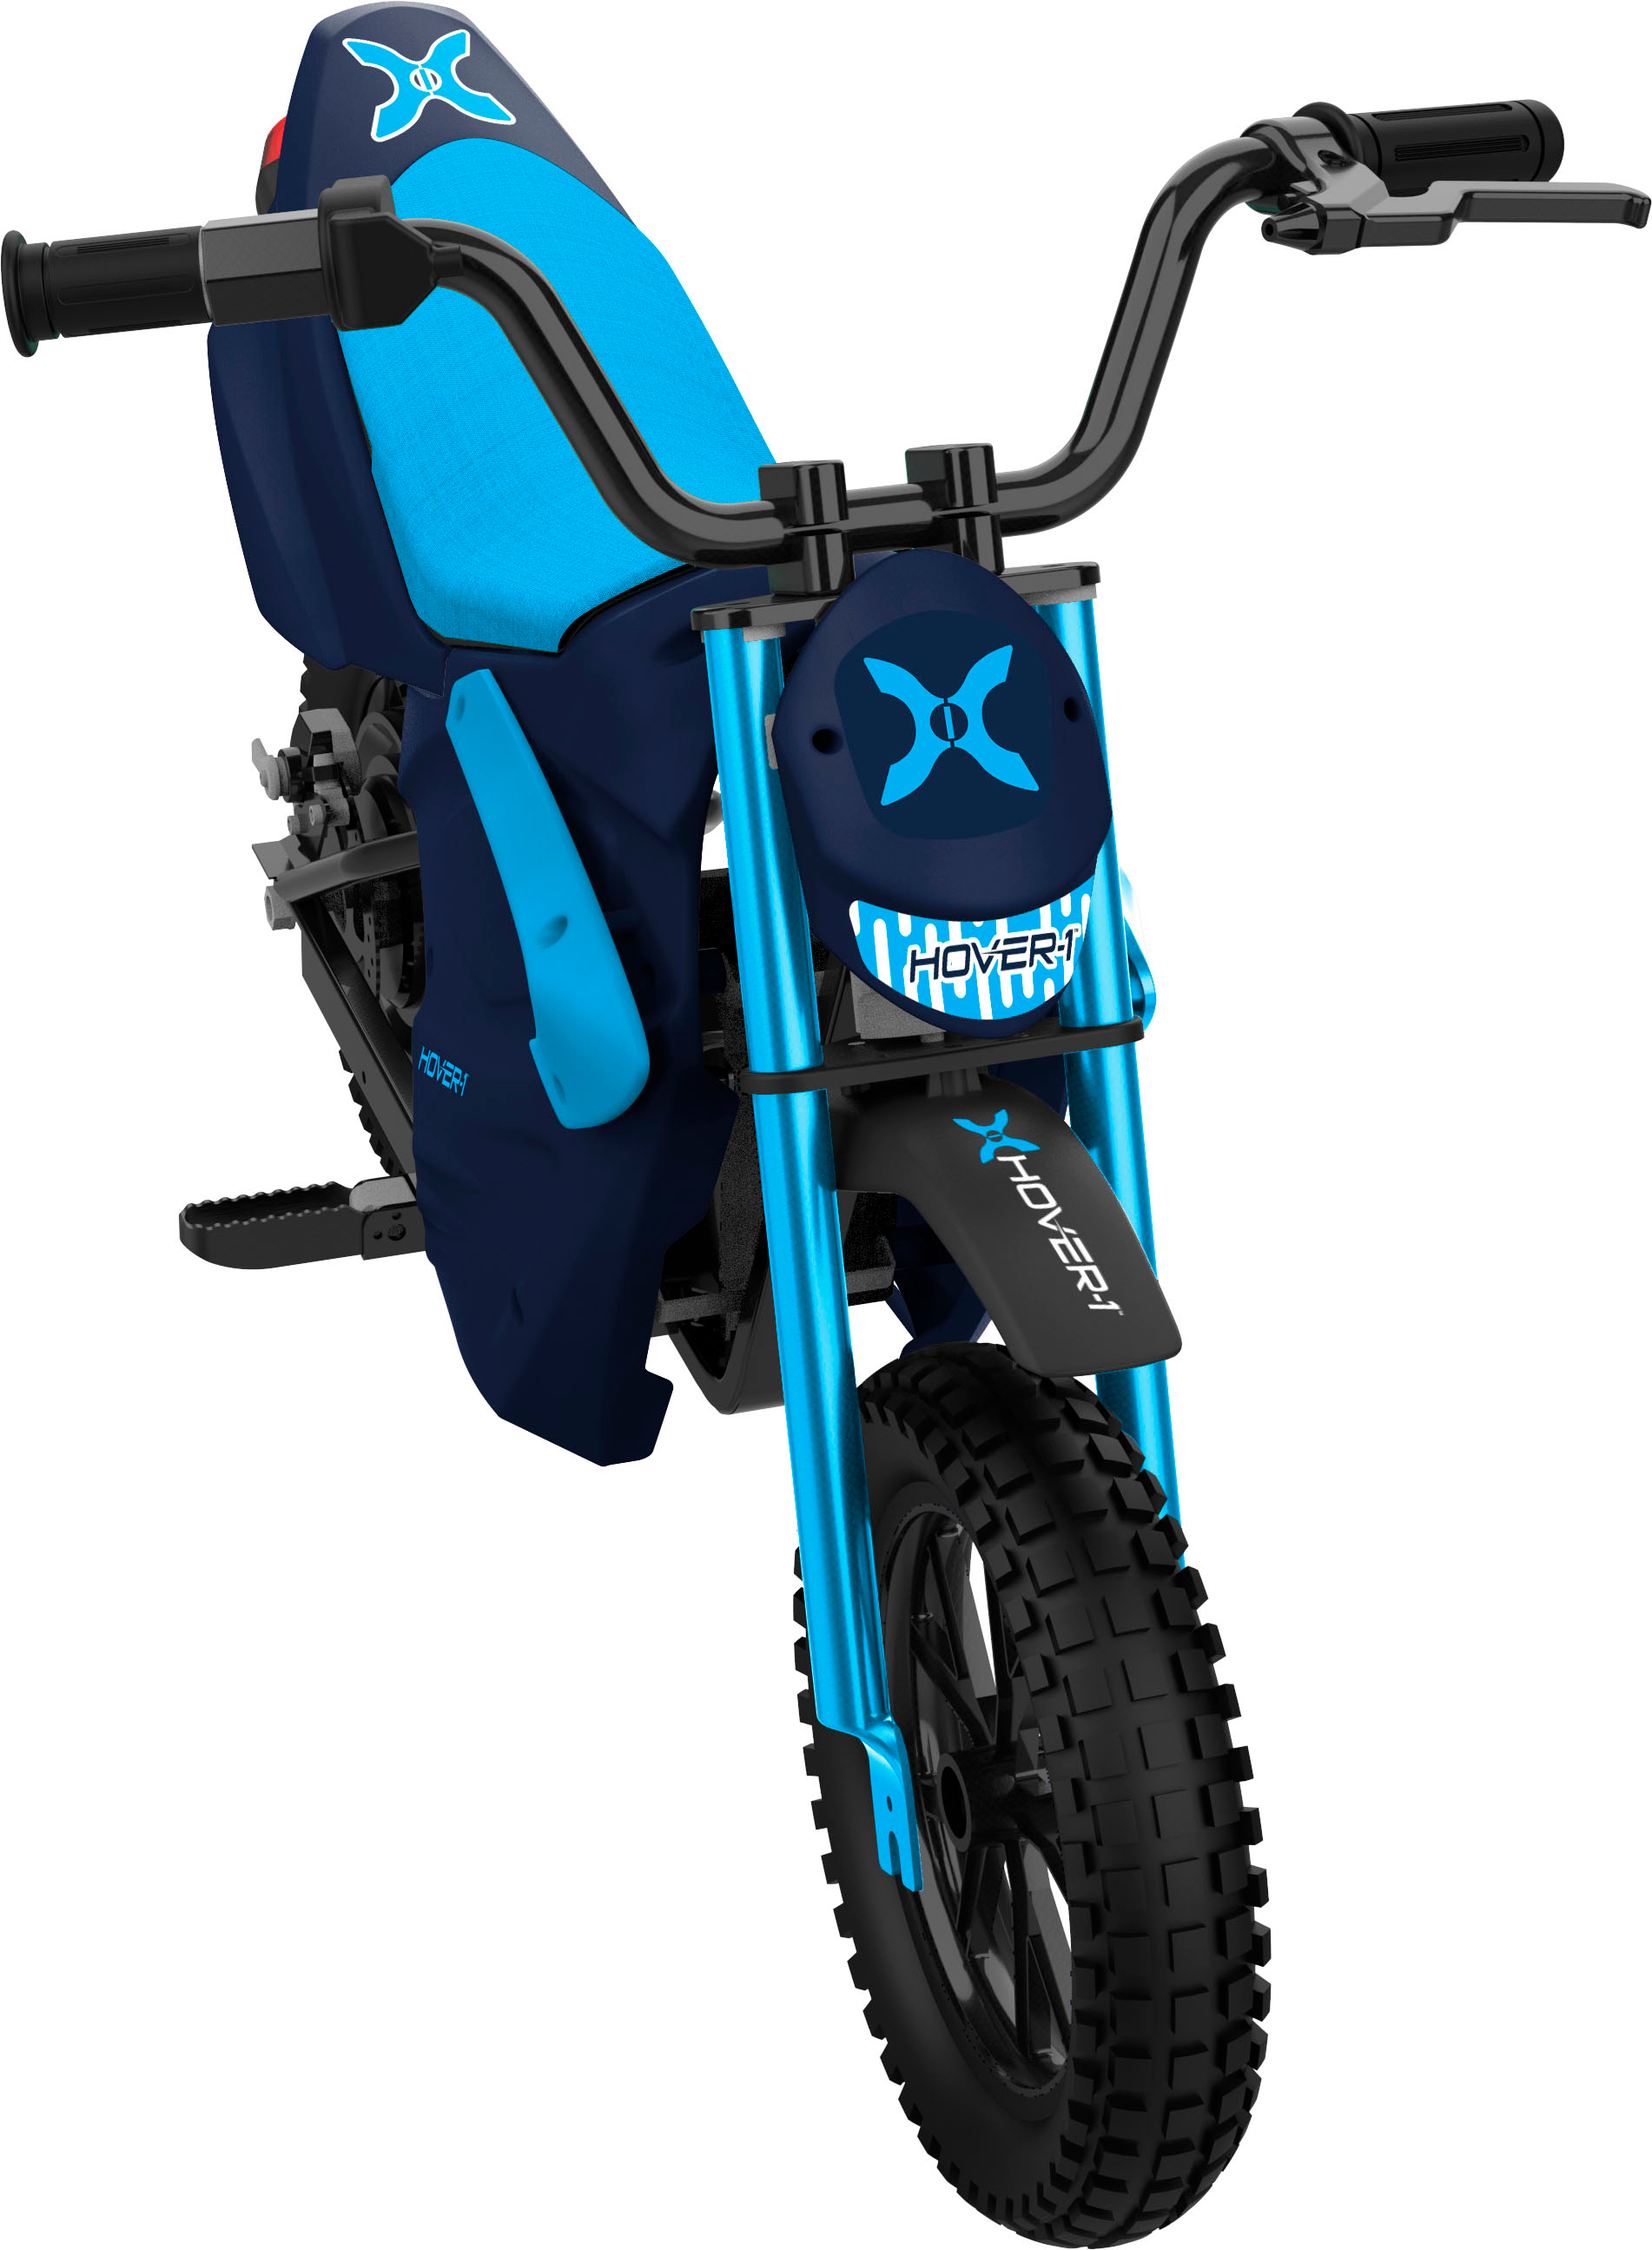 Left View: Hover-1 - Trak Electric Dirt Bike for Kids, Silent-chainless motor, Lithium-ion Battery, 9 mi Range, 9 mph Max Speed - Blue